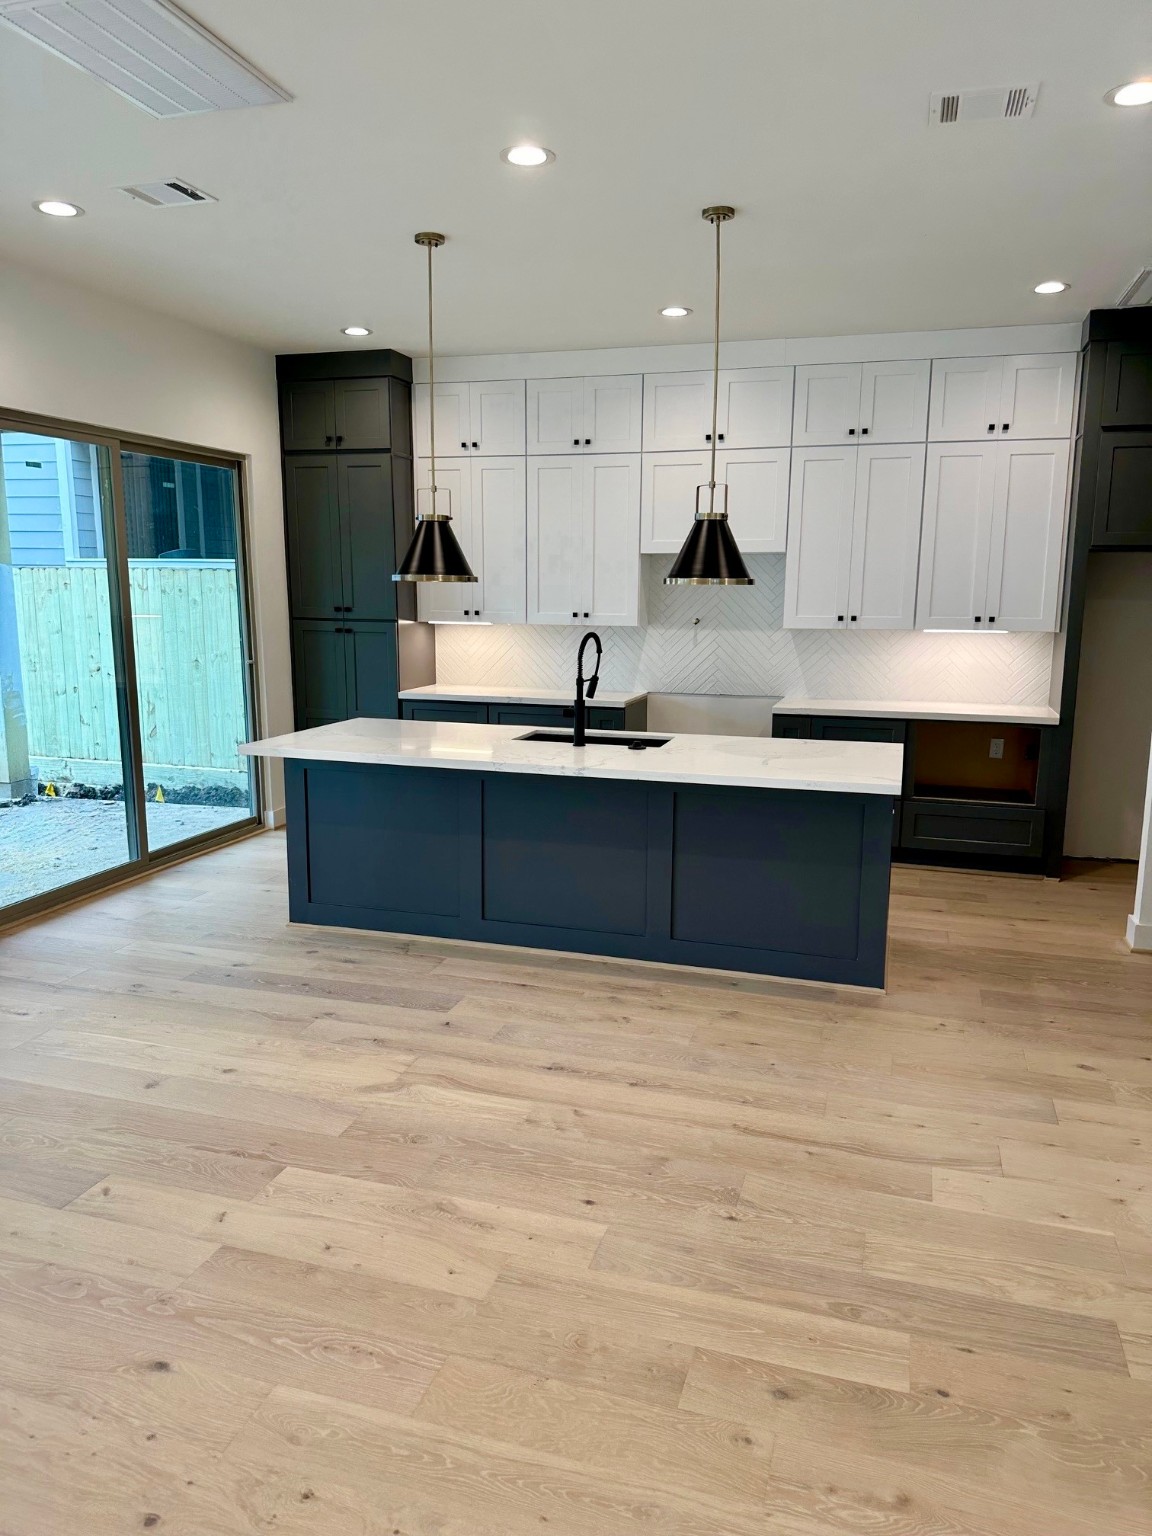 * PHOTO OF MODEL HOME * SELECTIONS MAY VARY * PHOTOS MAY SHOW A SIMILAR FLOOR PLAN AND/OR UPGRADED/ALTERNATIVE FINISHES * Please use these photos as a guide ONLY * Virtual Staging *